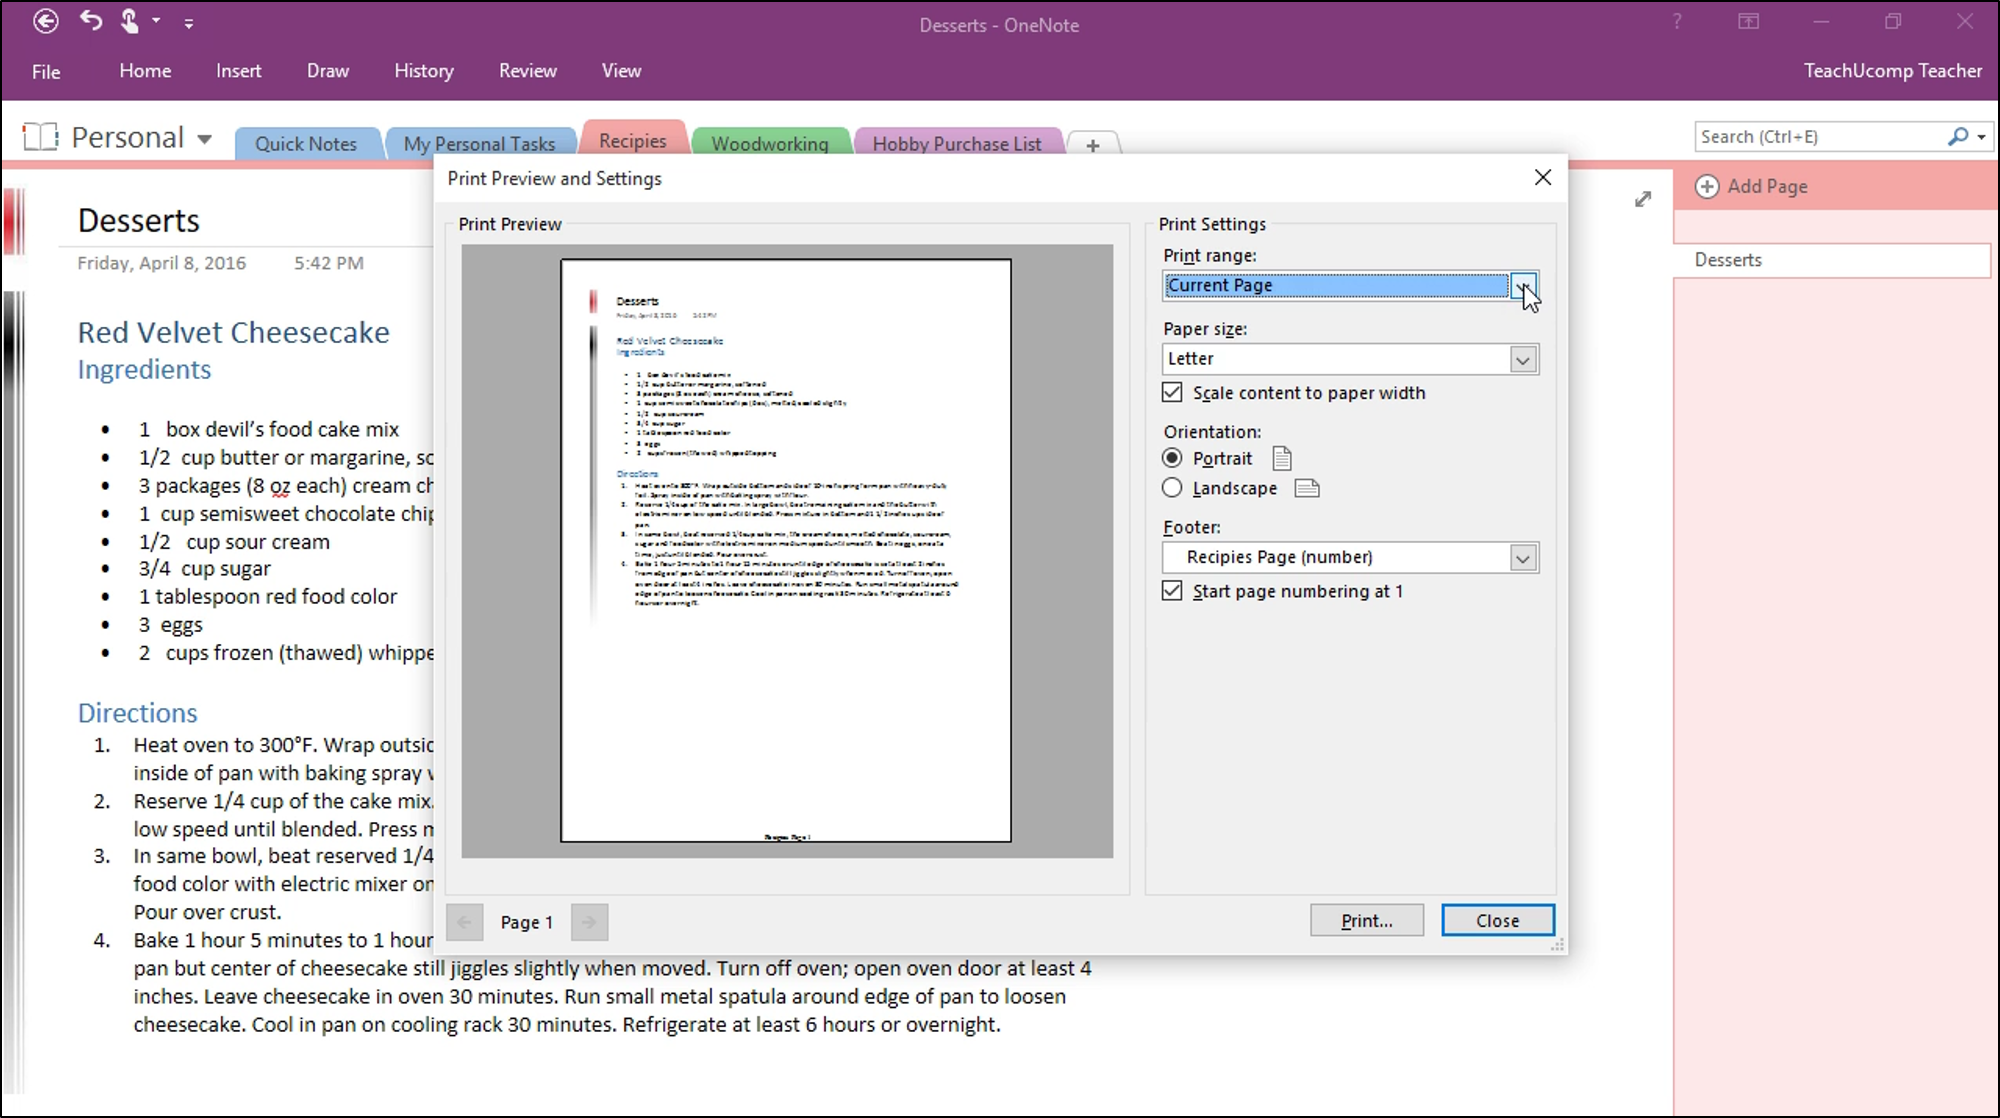 rearrange section tabs and page tabs in onenote 2016 for mac